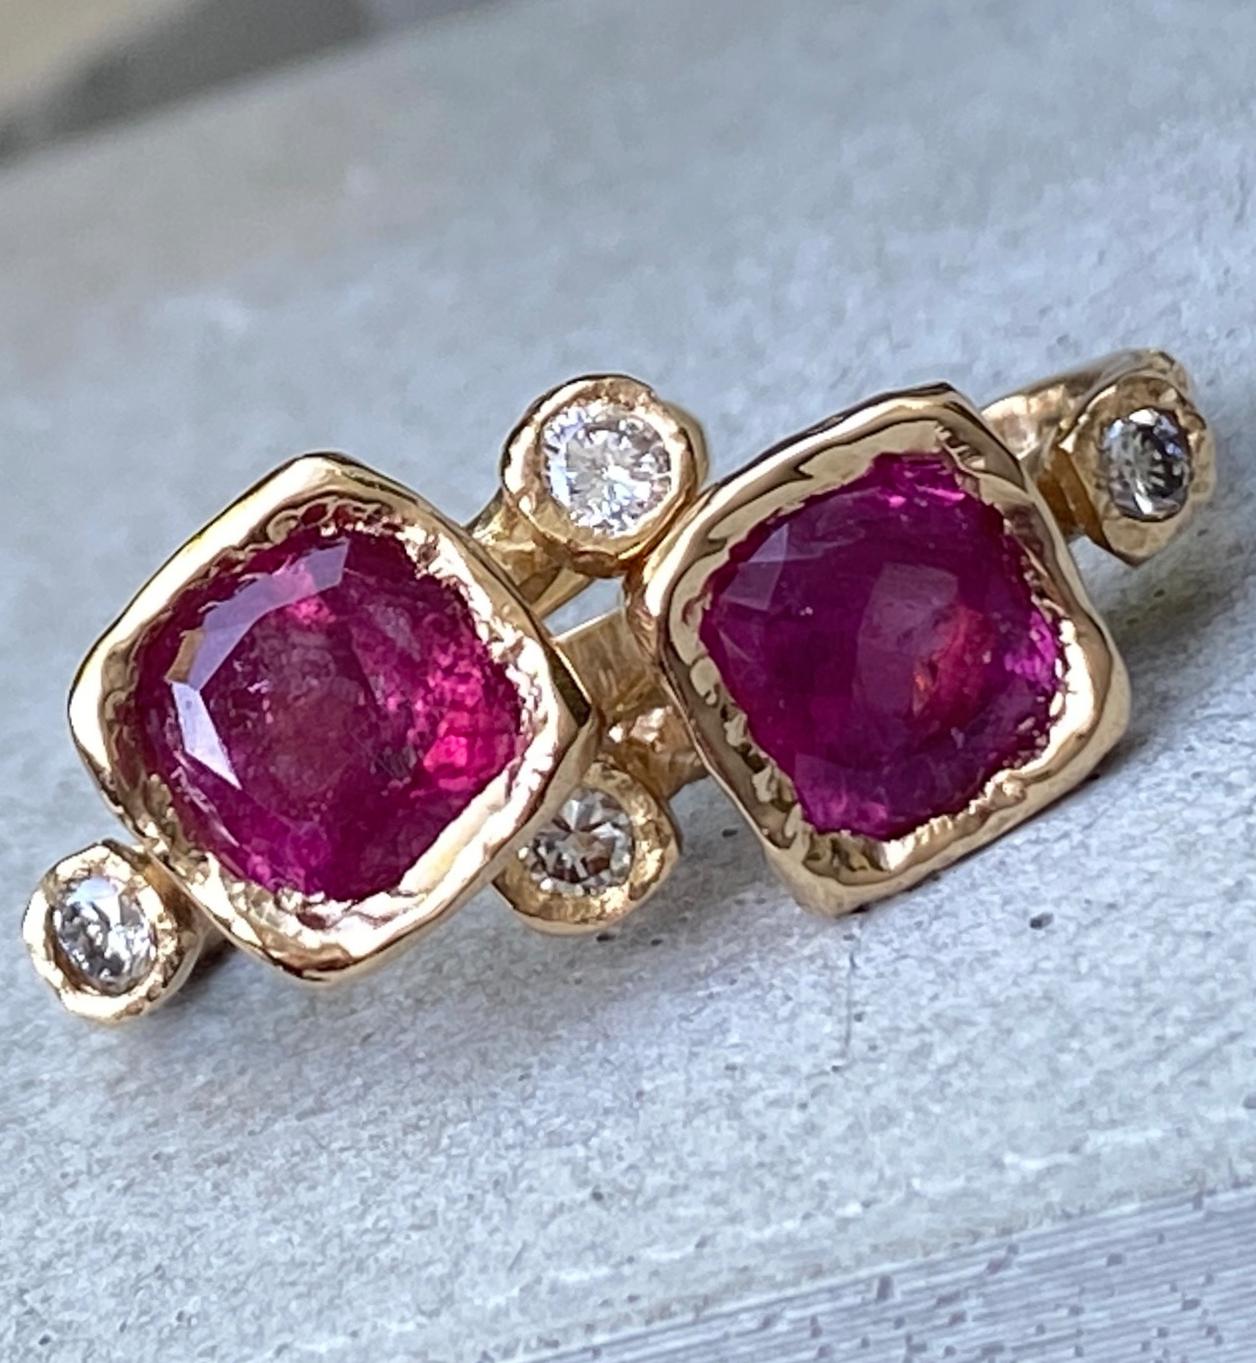 These great little earrings were a bit of an experiment.  Eytan wanted the unmistakable rich pink of natural, untreated tourmaline, but he wanted to encase them in a lot of rough, textured gold, so he decided to get roughly cut and very included